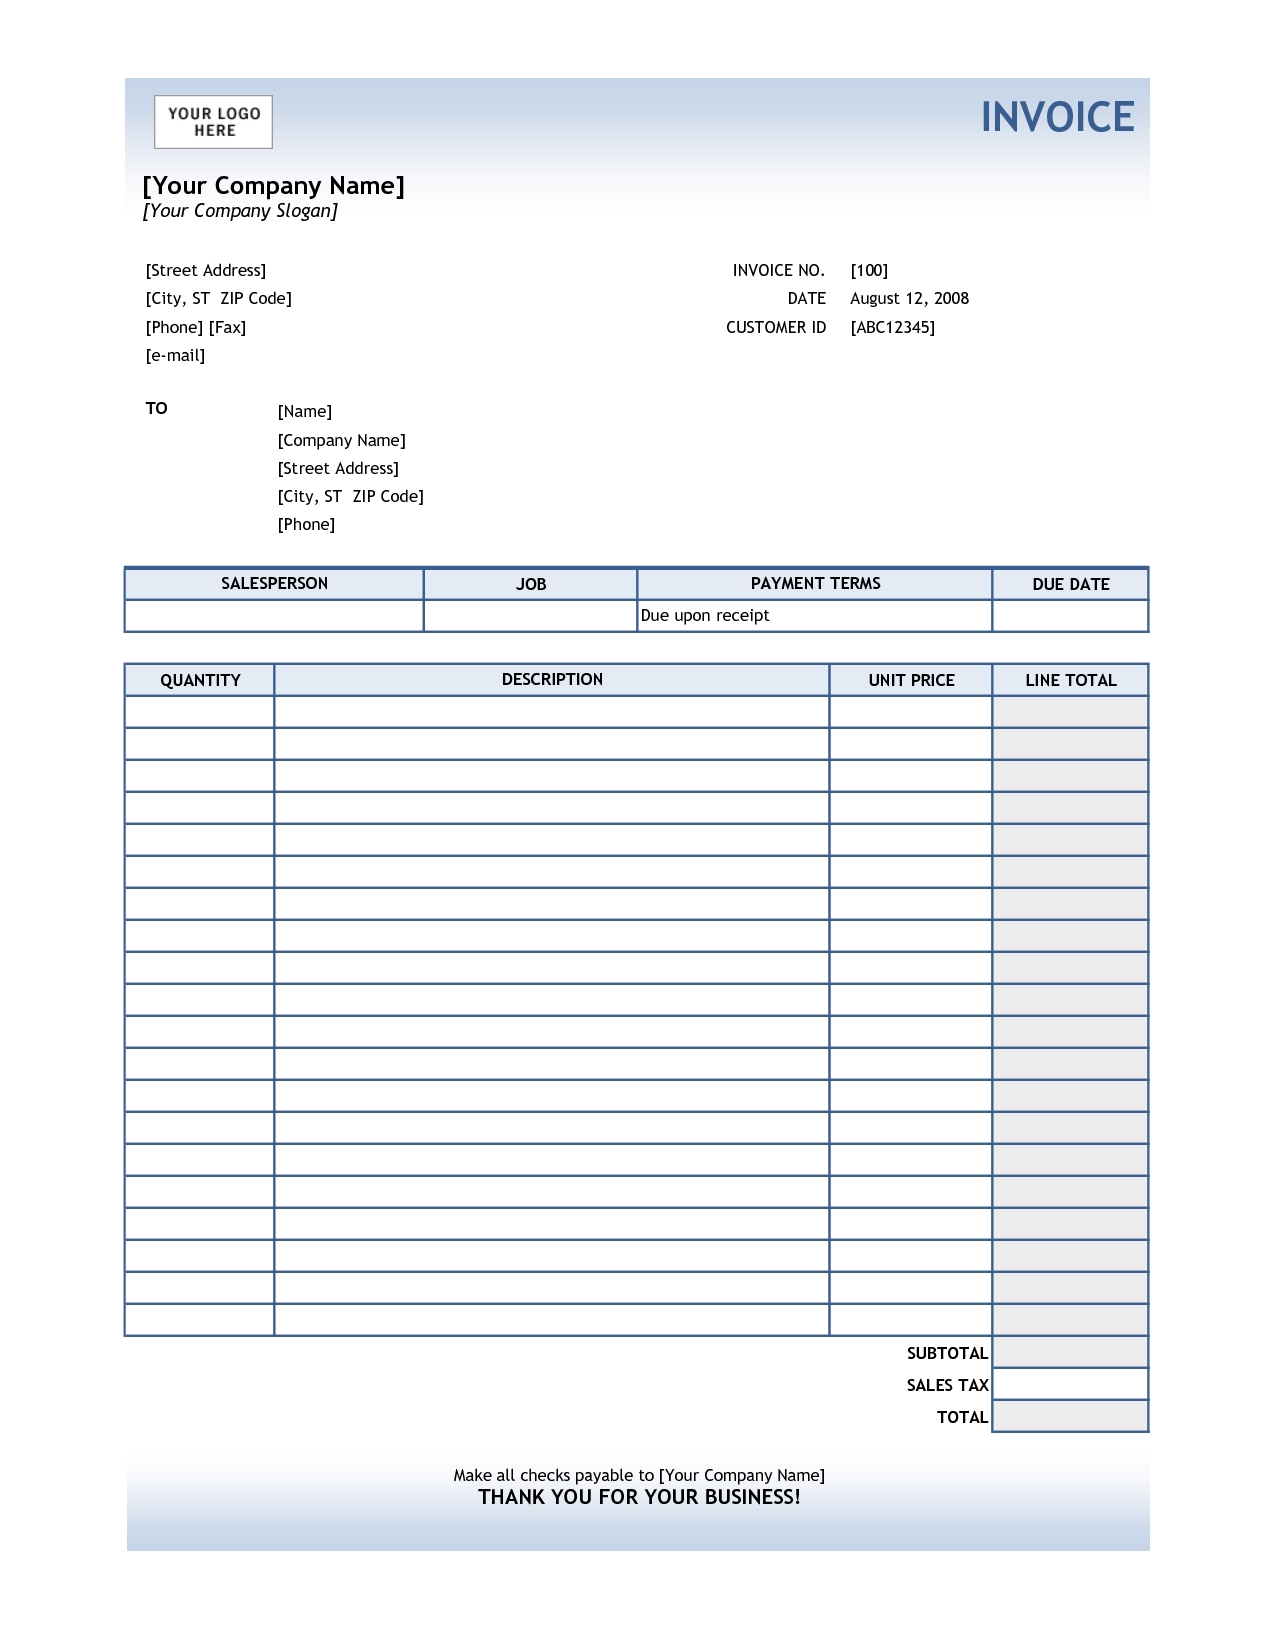 12 best photos of excel invoice template downloadable invoice excel invoice form